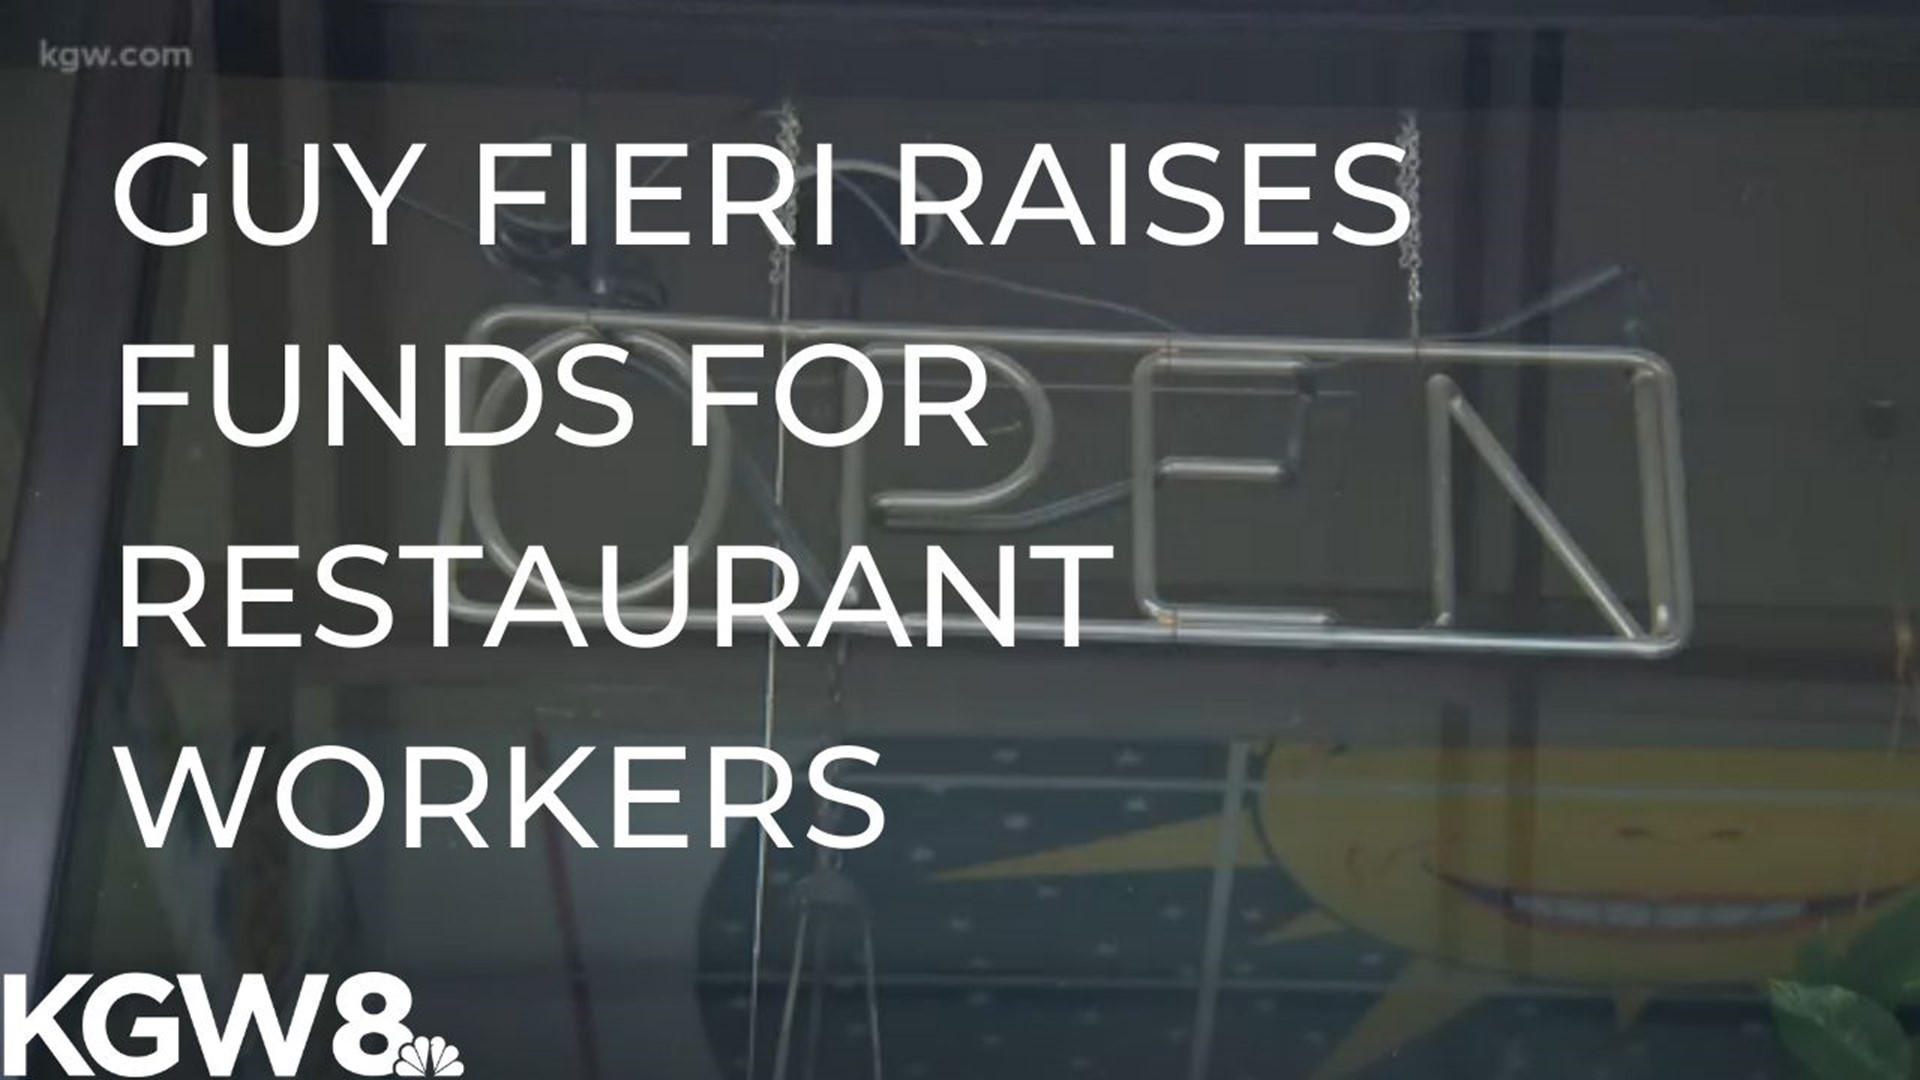 Guy Fieri has teamed up with a Portland law-firm to help restaurant workers who are out of work.